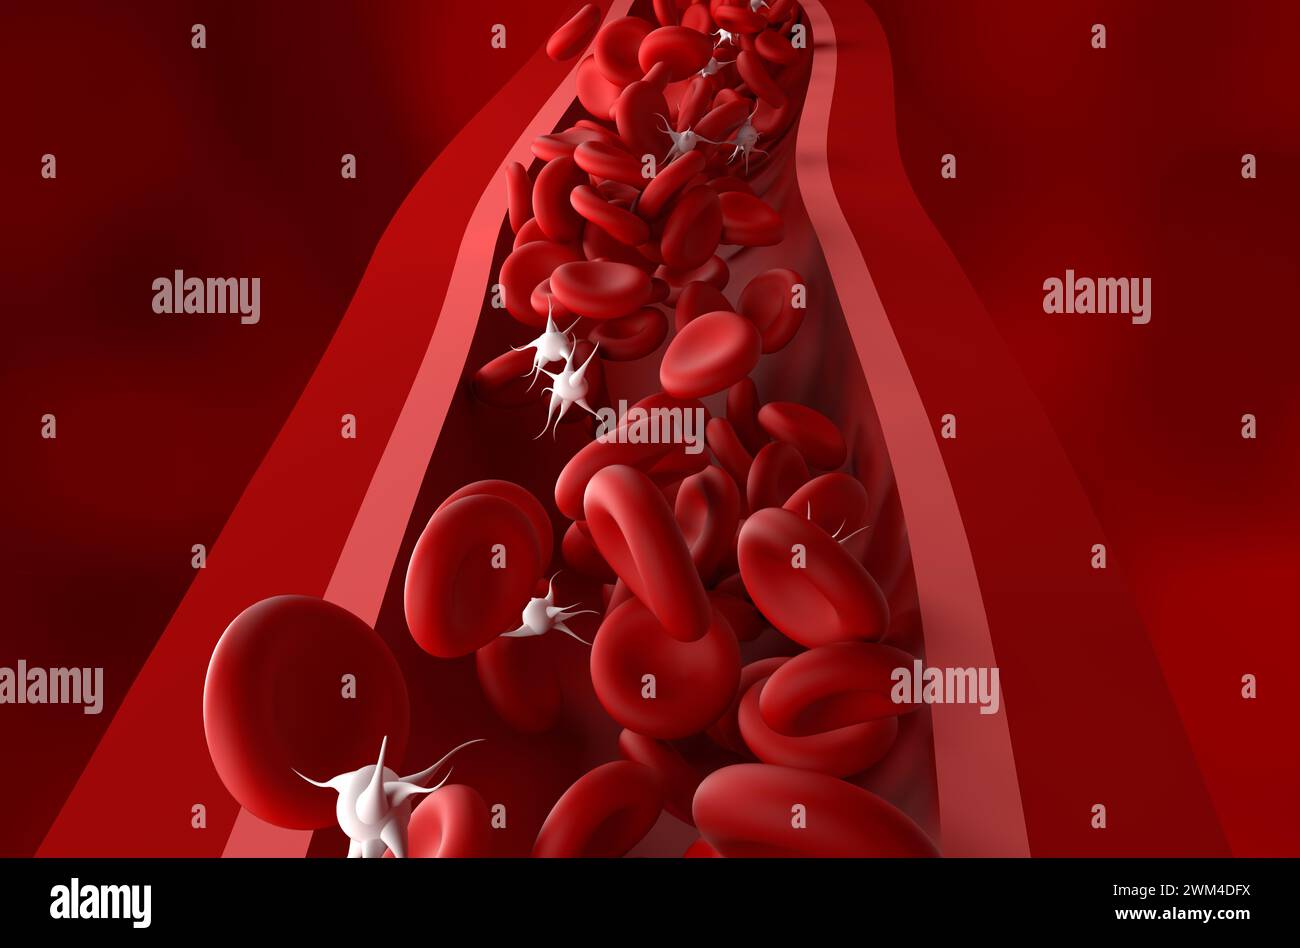 Reduced platelet (thrombocytes) count in Immune thrombocytopenic purpura (ITP) - front view 3d illustration Stock Photo